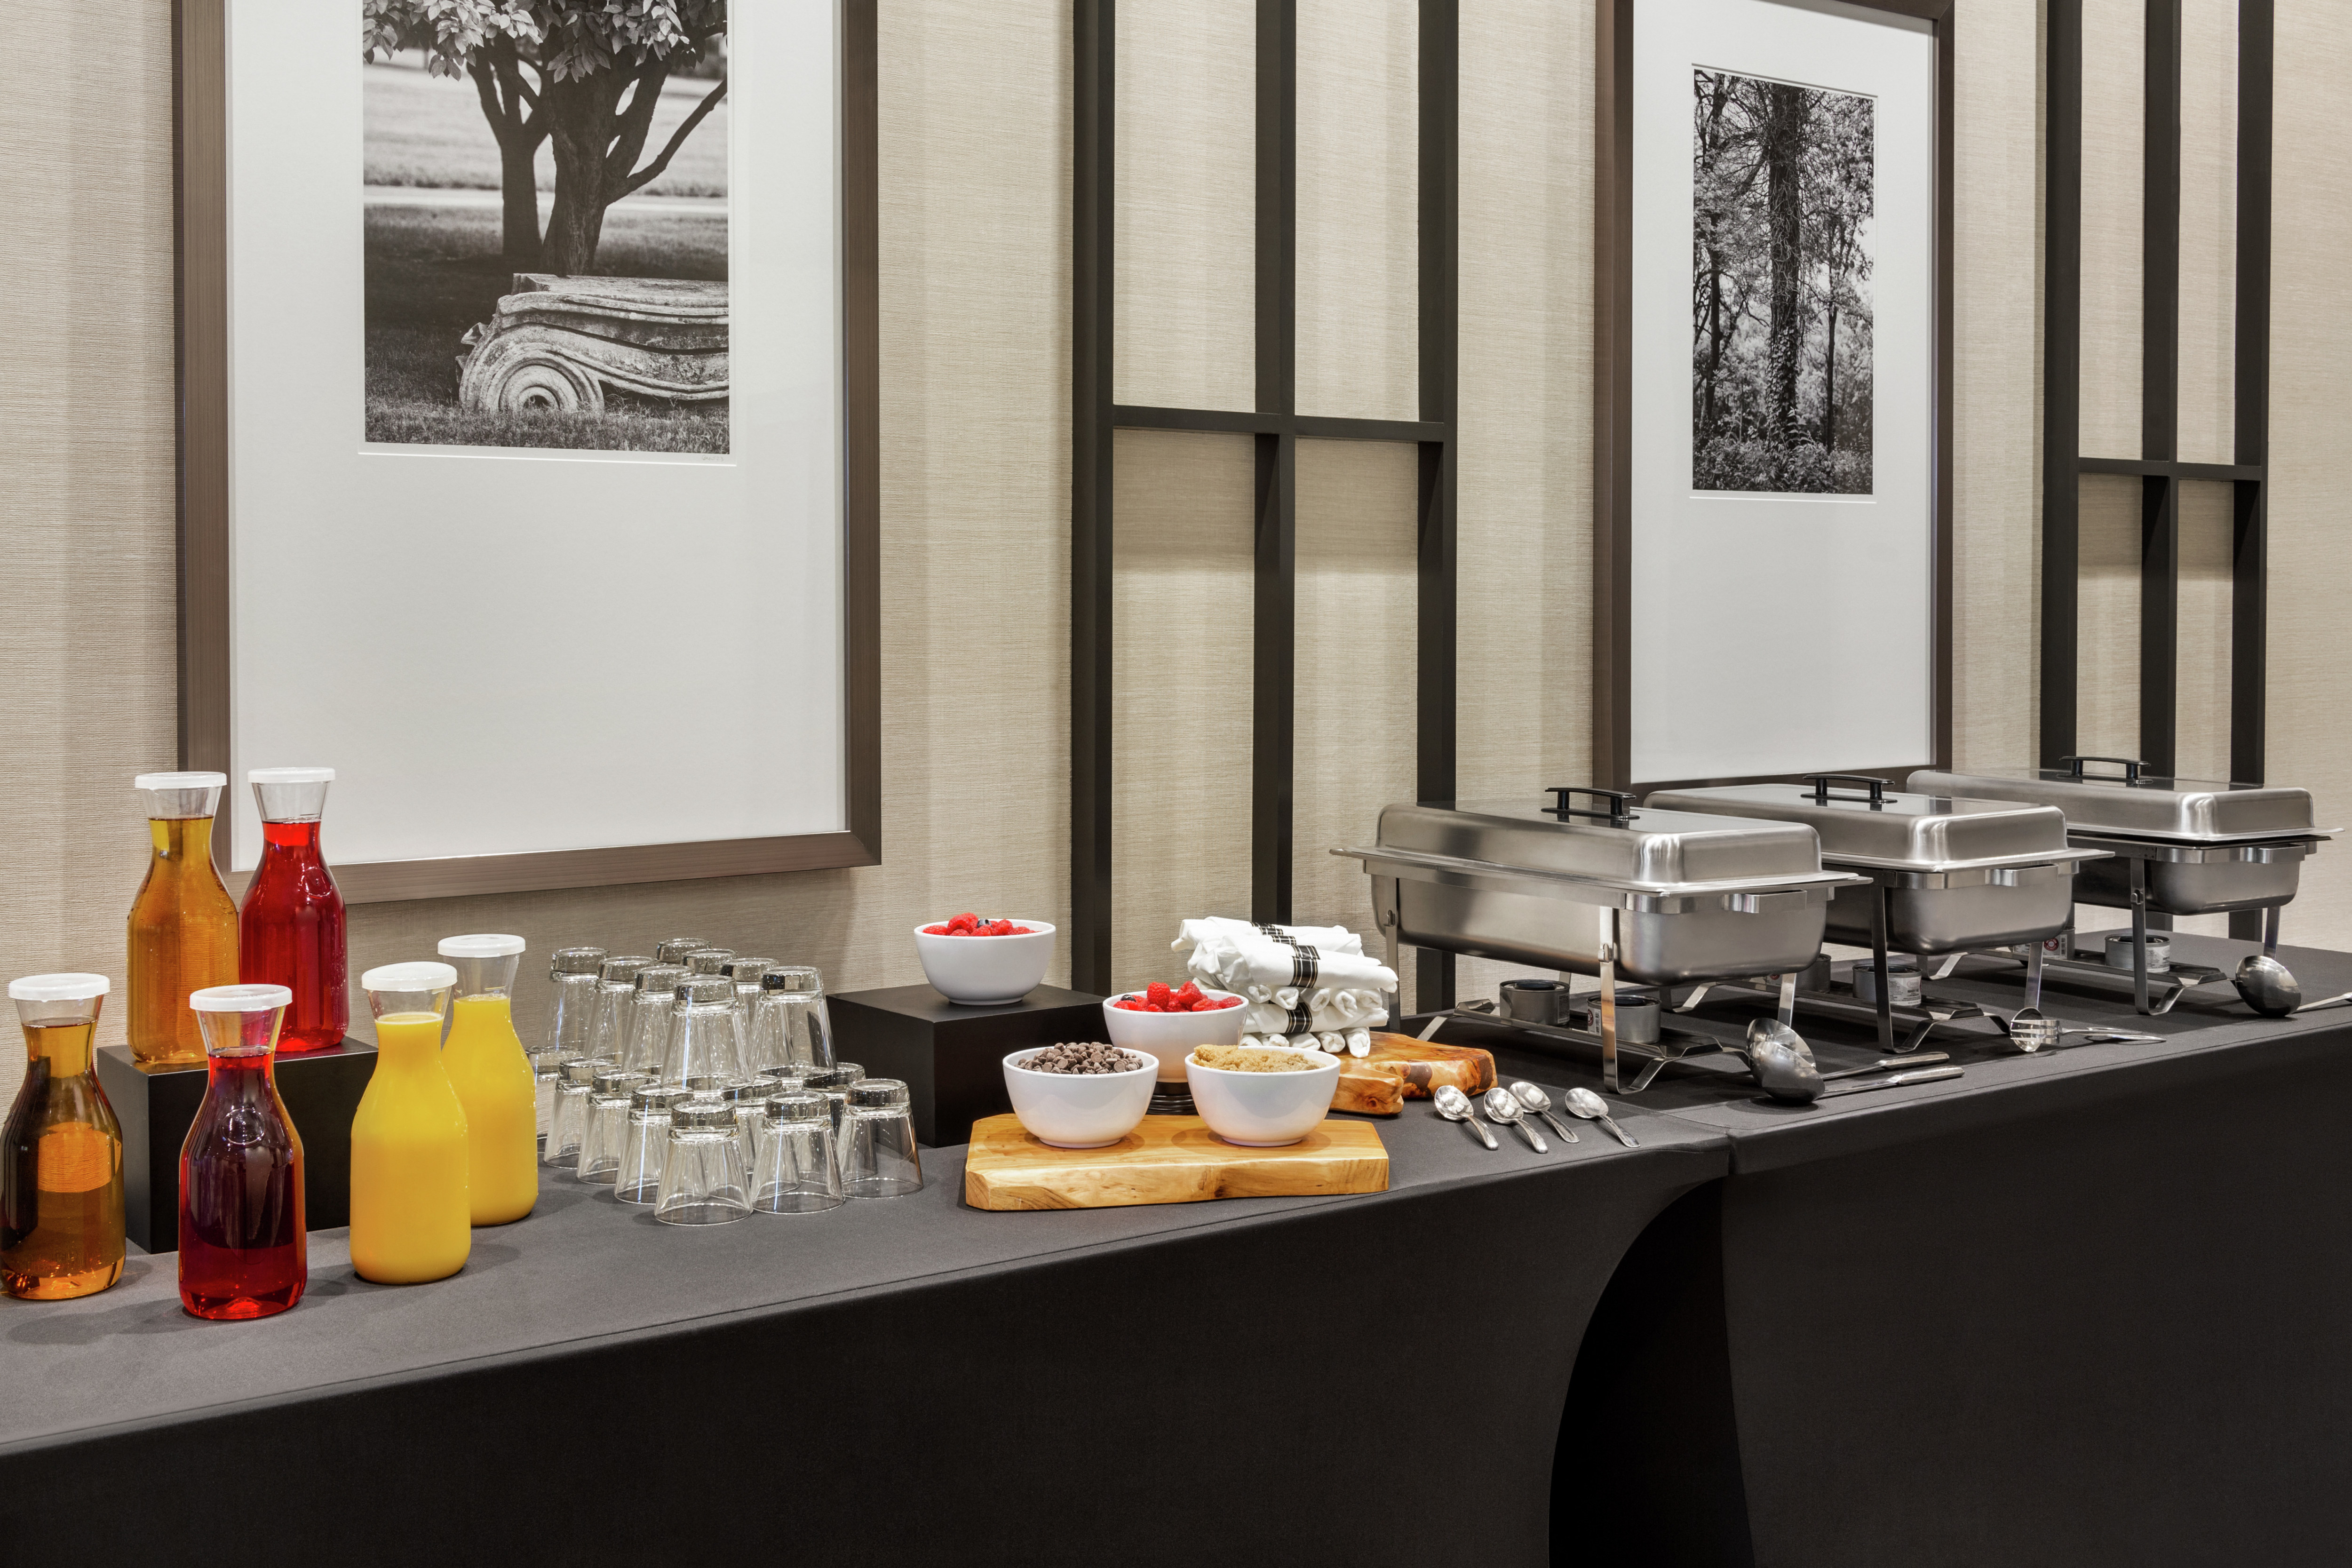 Food and beverage station in meeting room.